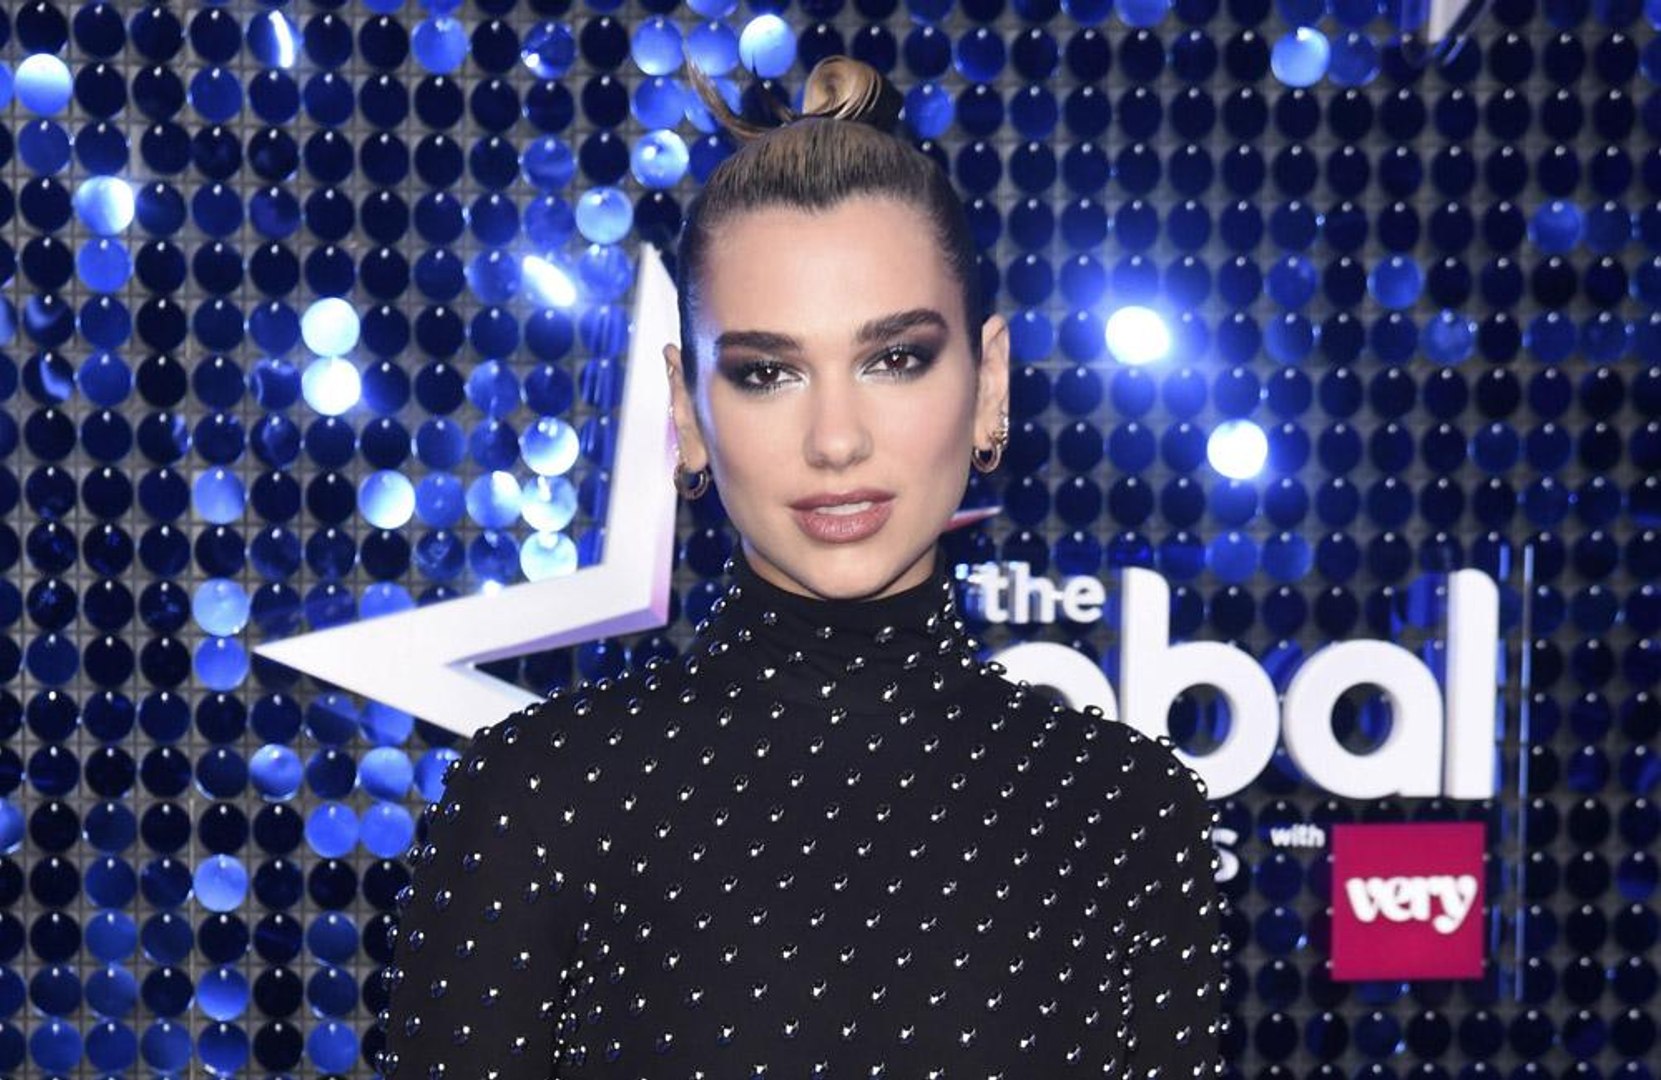 ⁣Dua Lipa says negative experiences inspired her songwriting